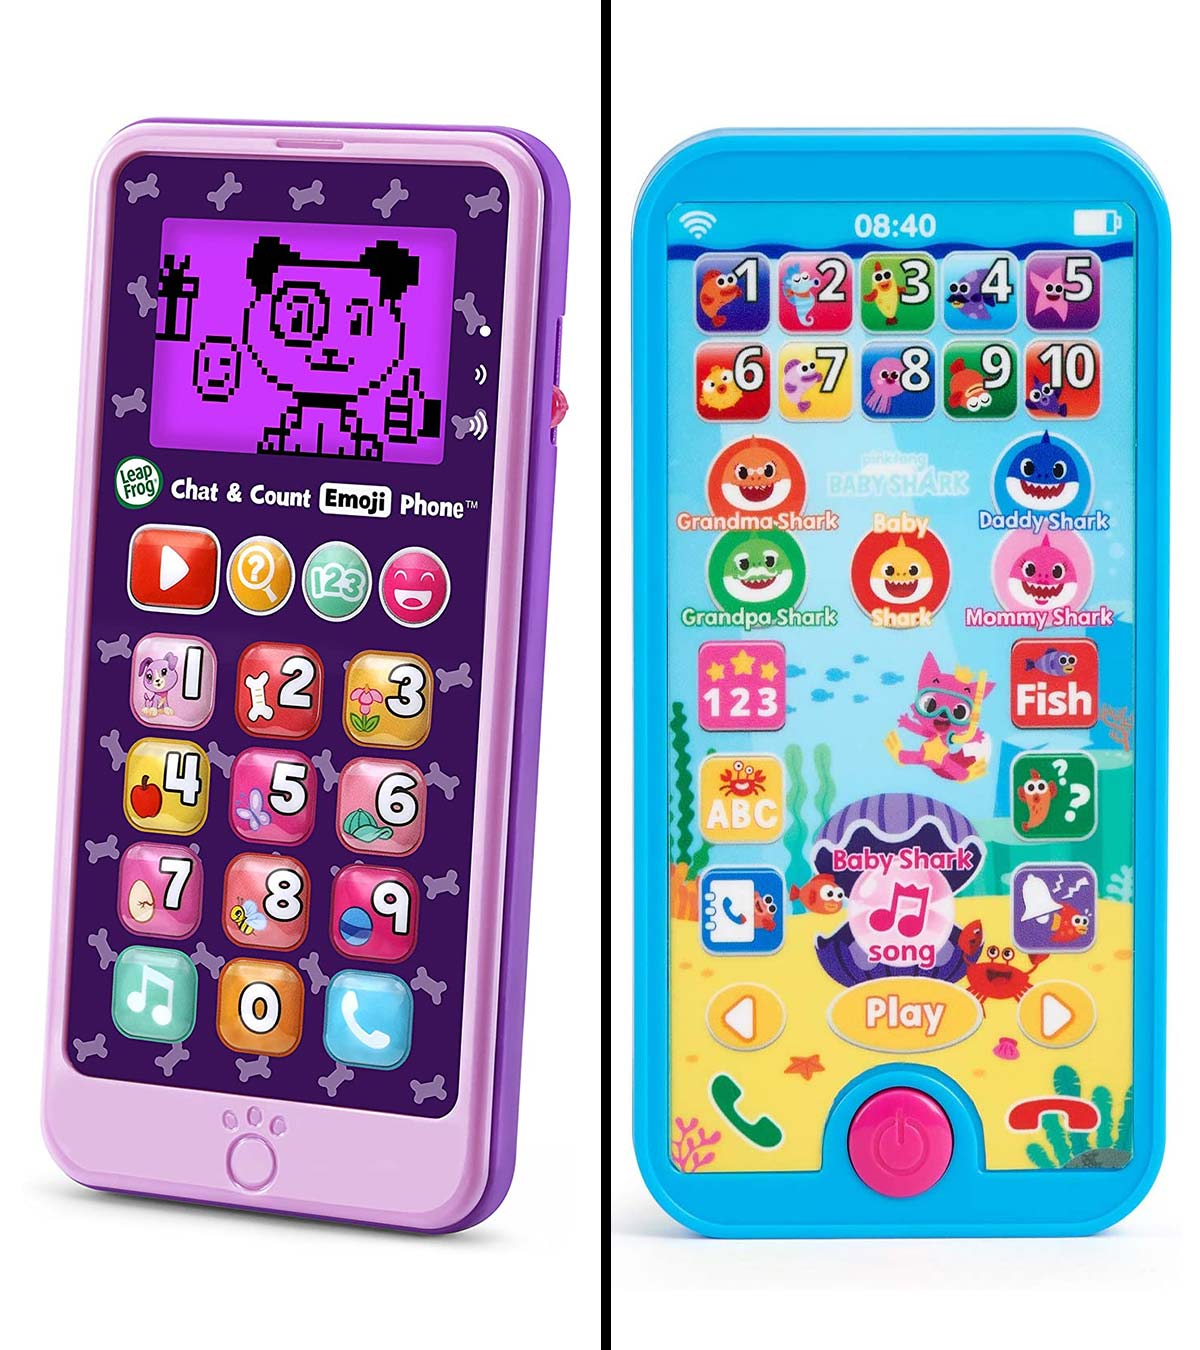 Wendy Mall Yphone Learning Toy Phone with USB Cable Toy Mobile Phone for Kids Children New Educational Gifts Color Random 